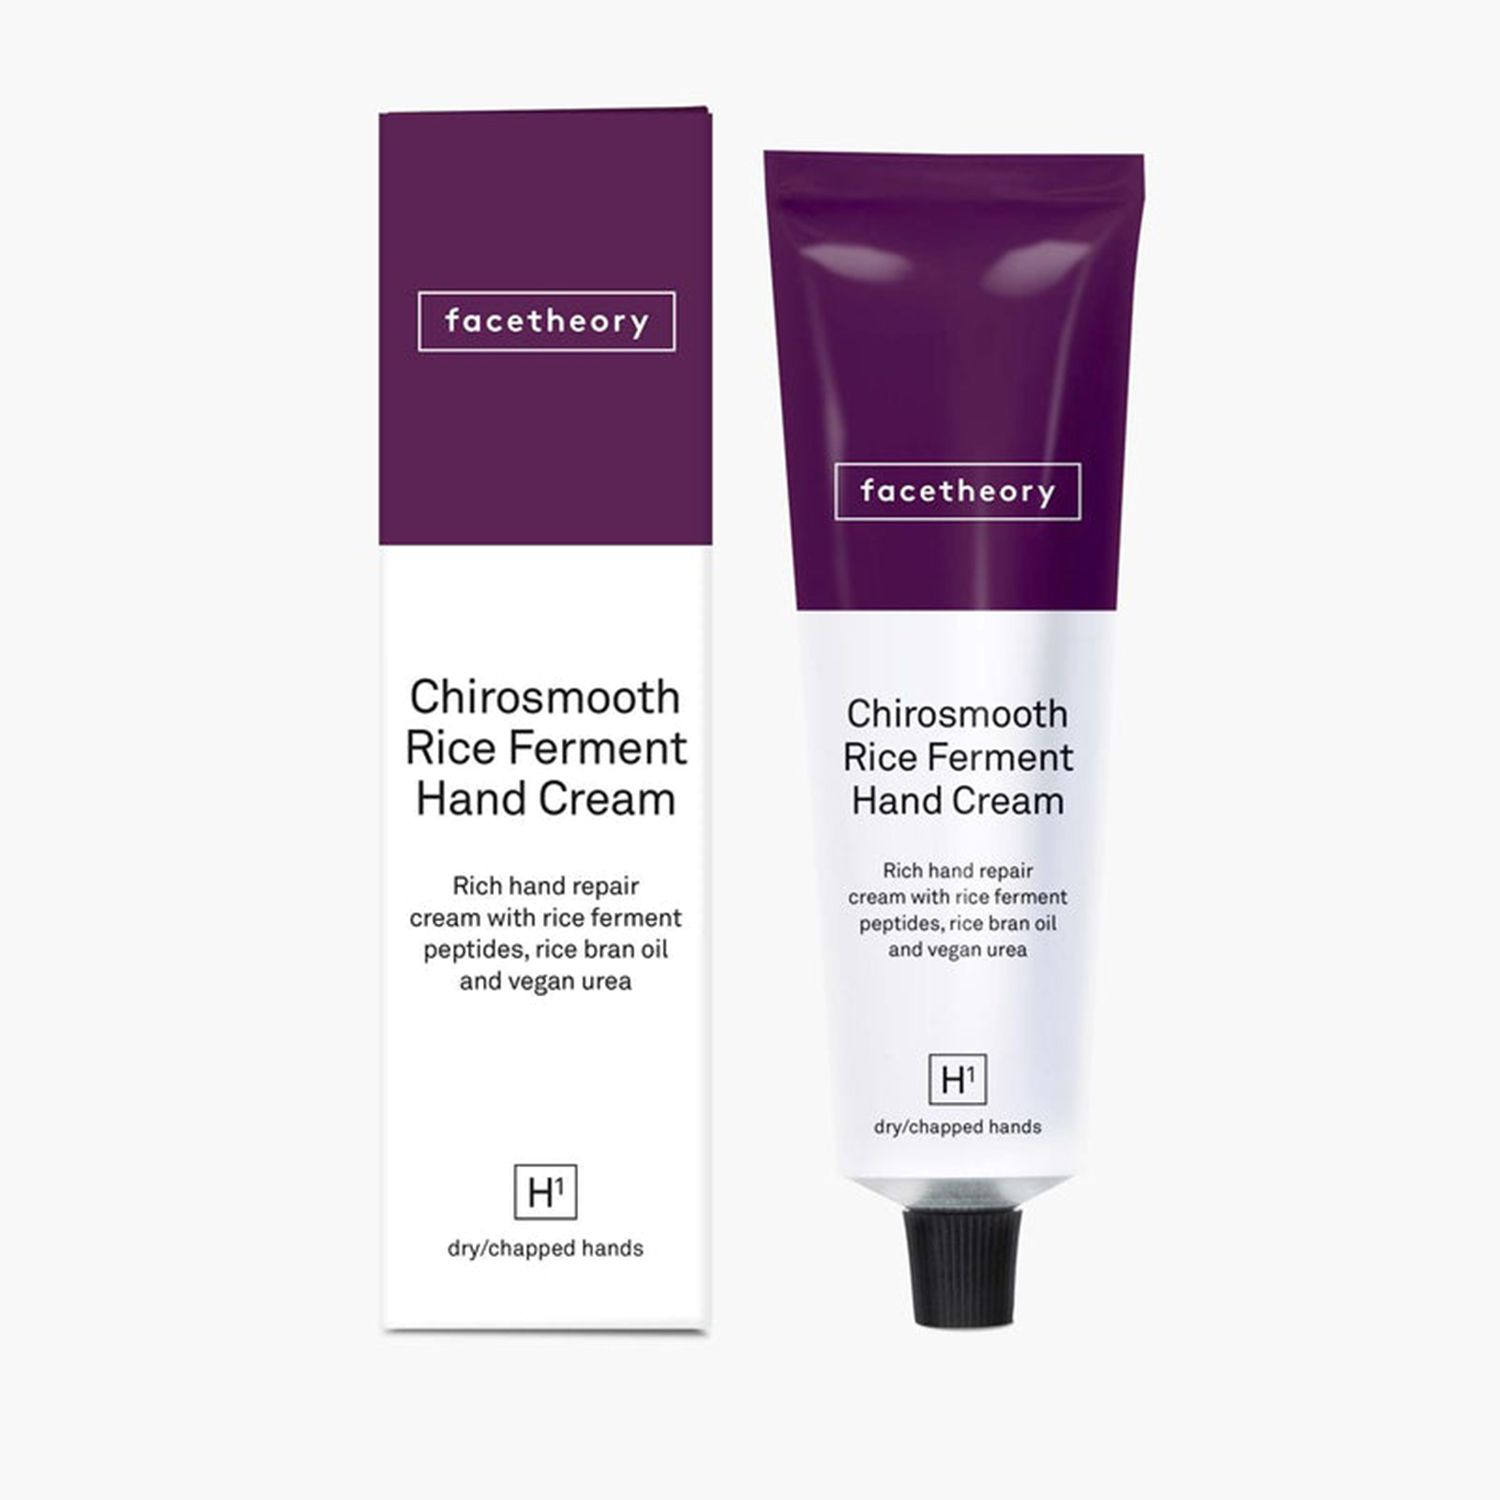 Facetheory Chirosmooth Hand Cream H1 with Rice Ferment Peptides, Rice Bran Oil and Urea